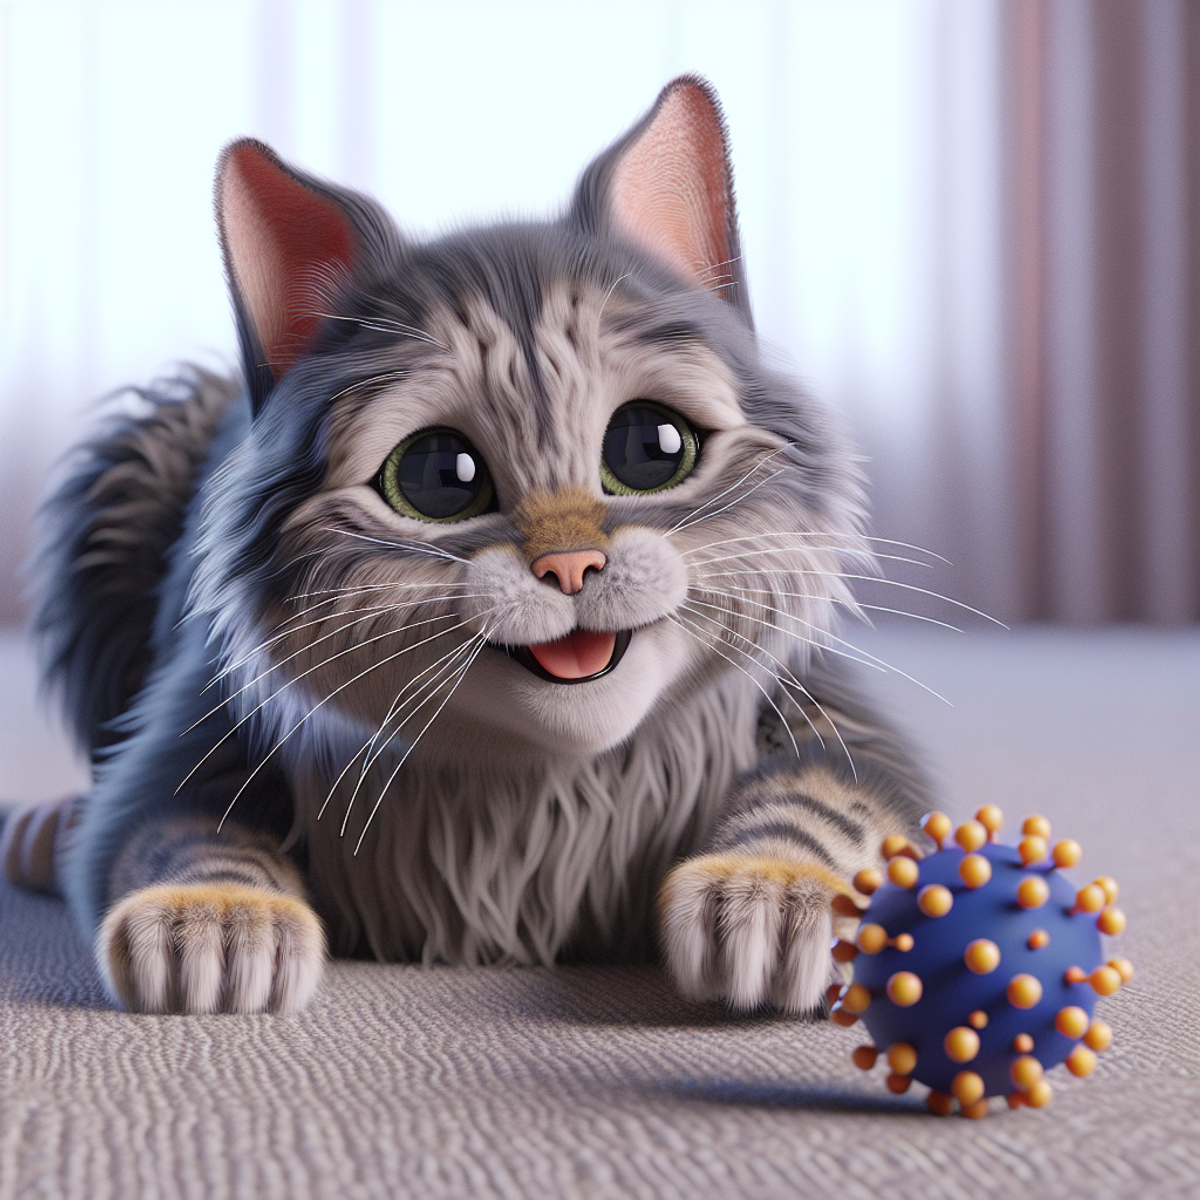 An elderly gray and white cat happily playing with a feather toy.